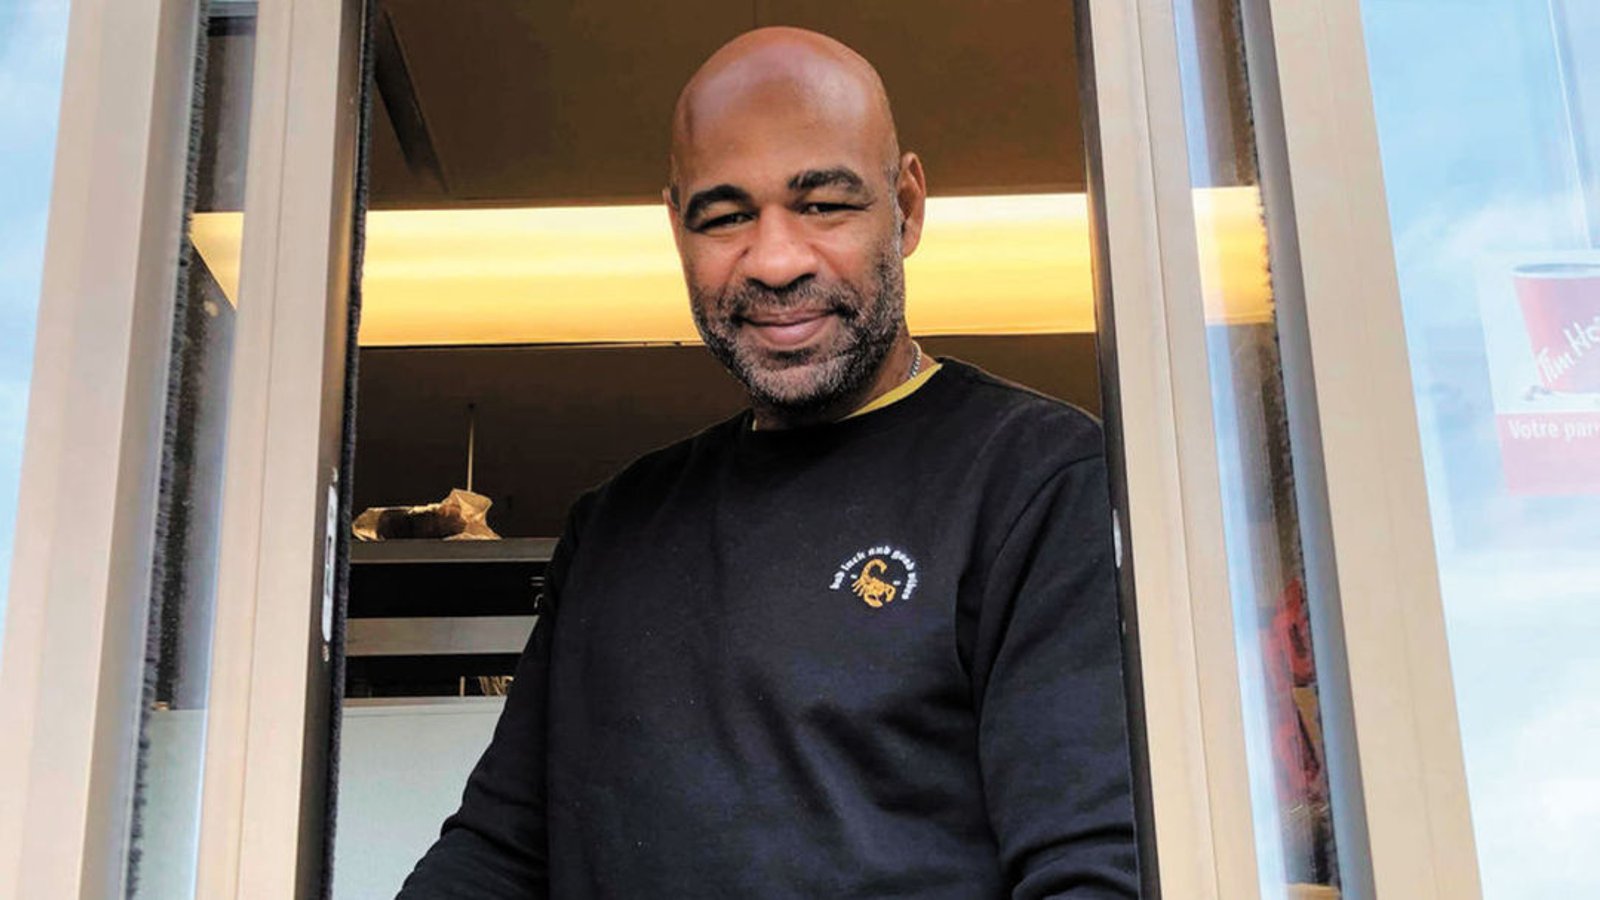 Donald Brashear gets hired by hockey club after stint at Tim Hortons 